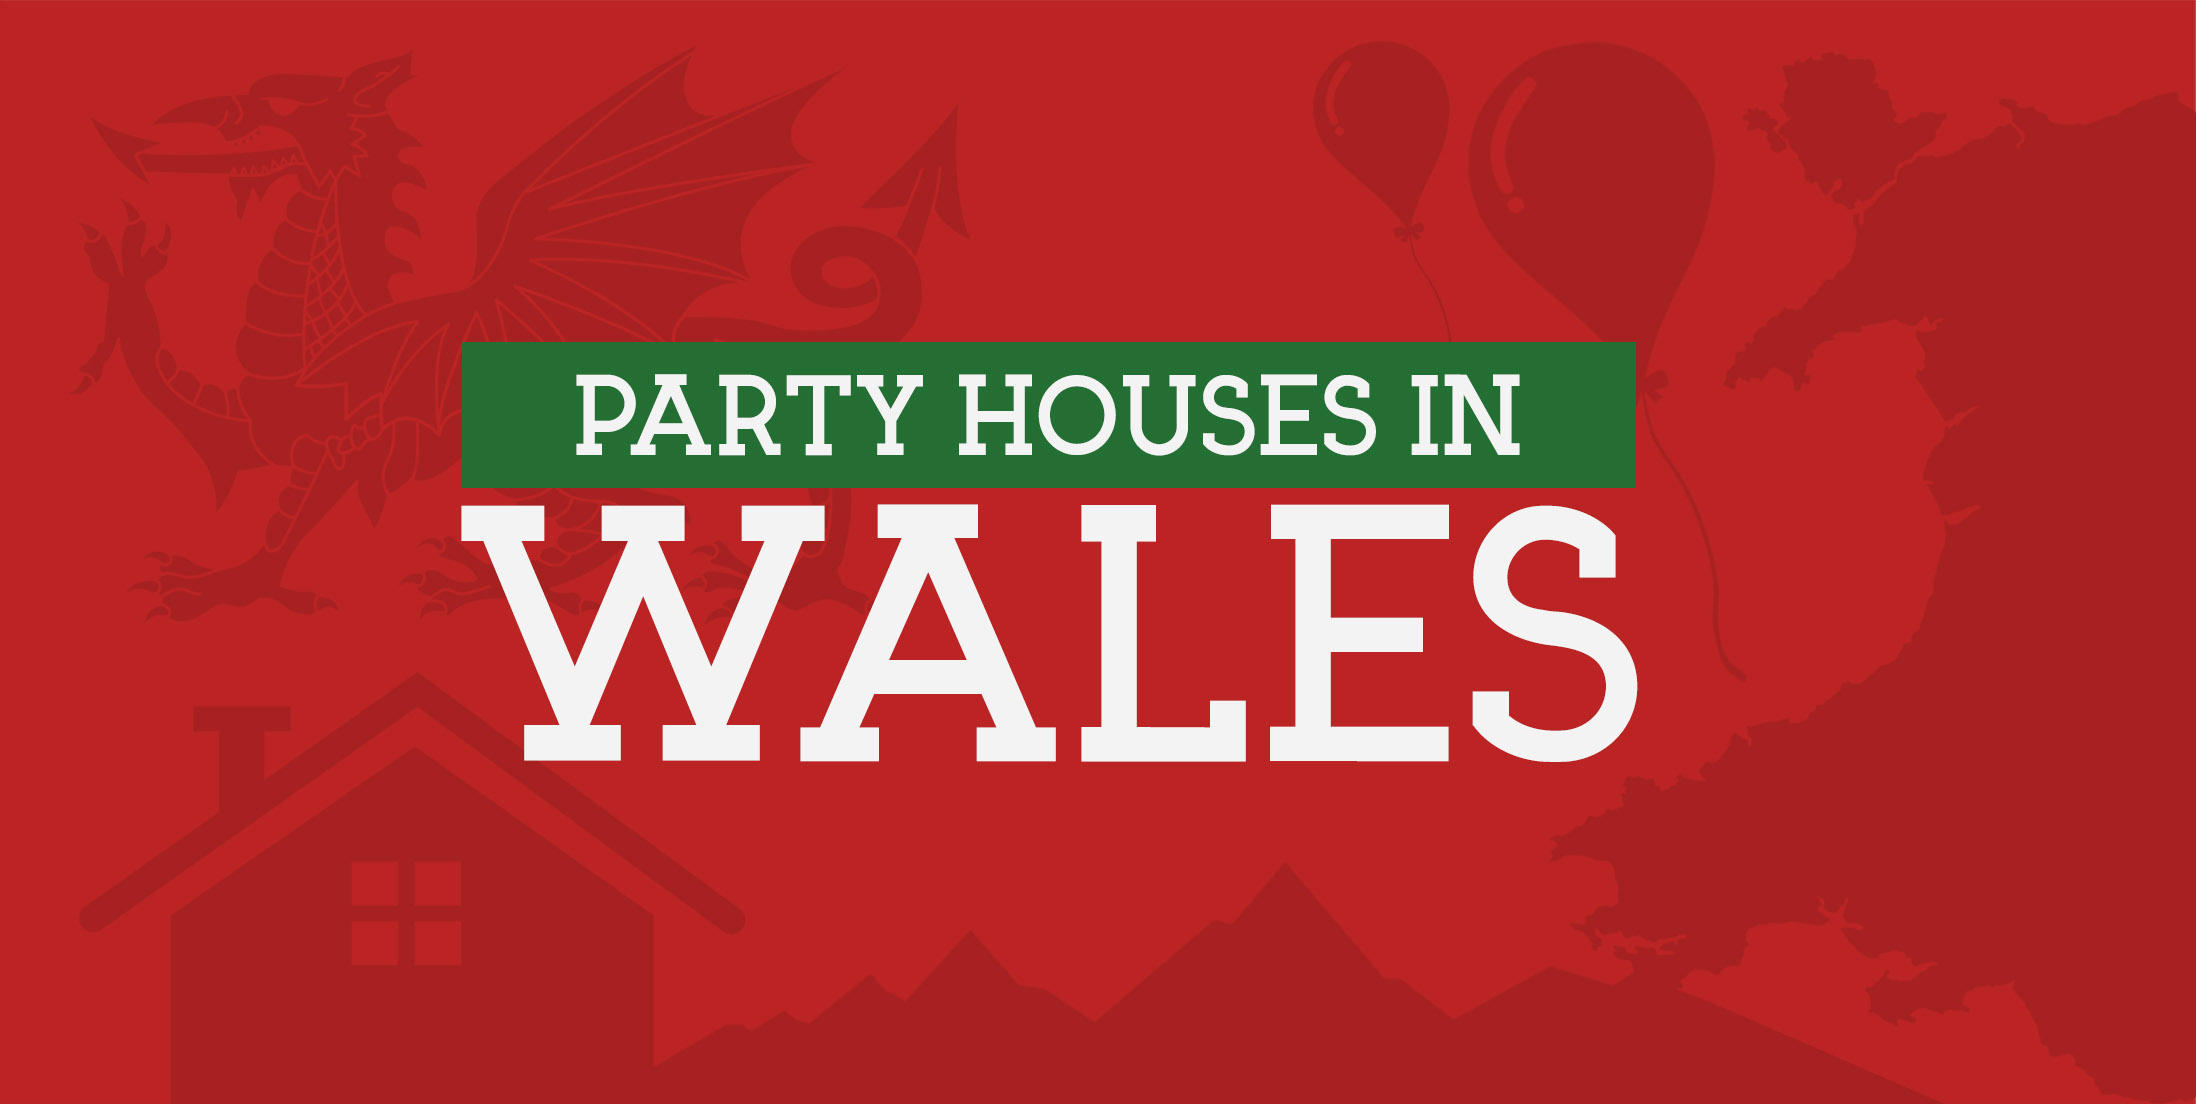 Party Houses in Wales